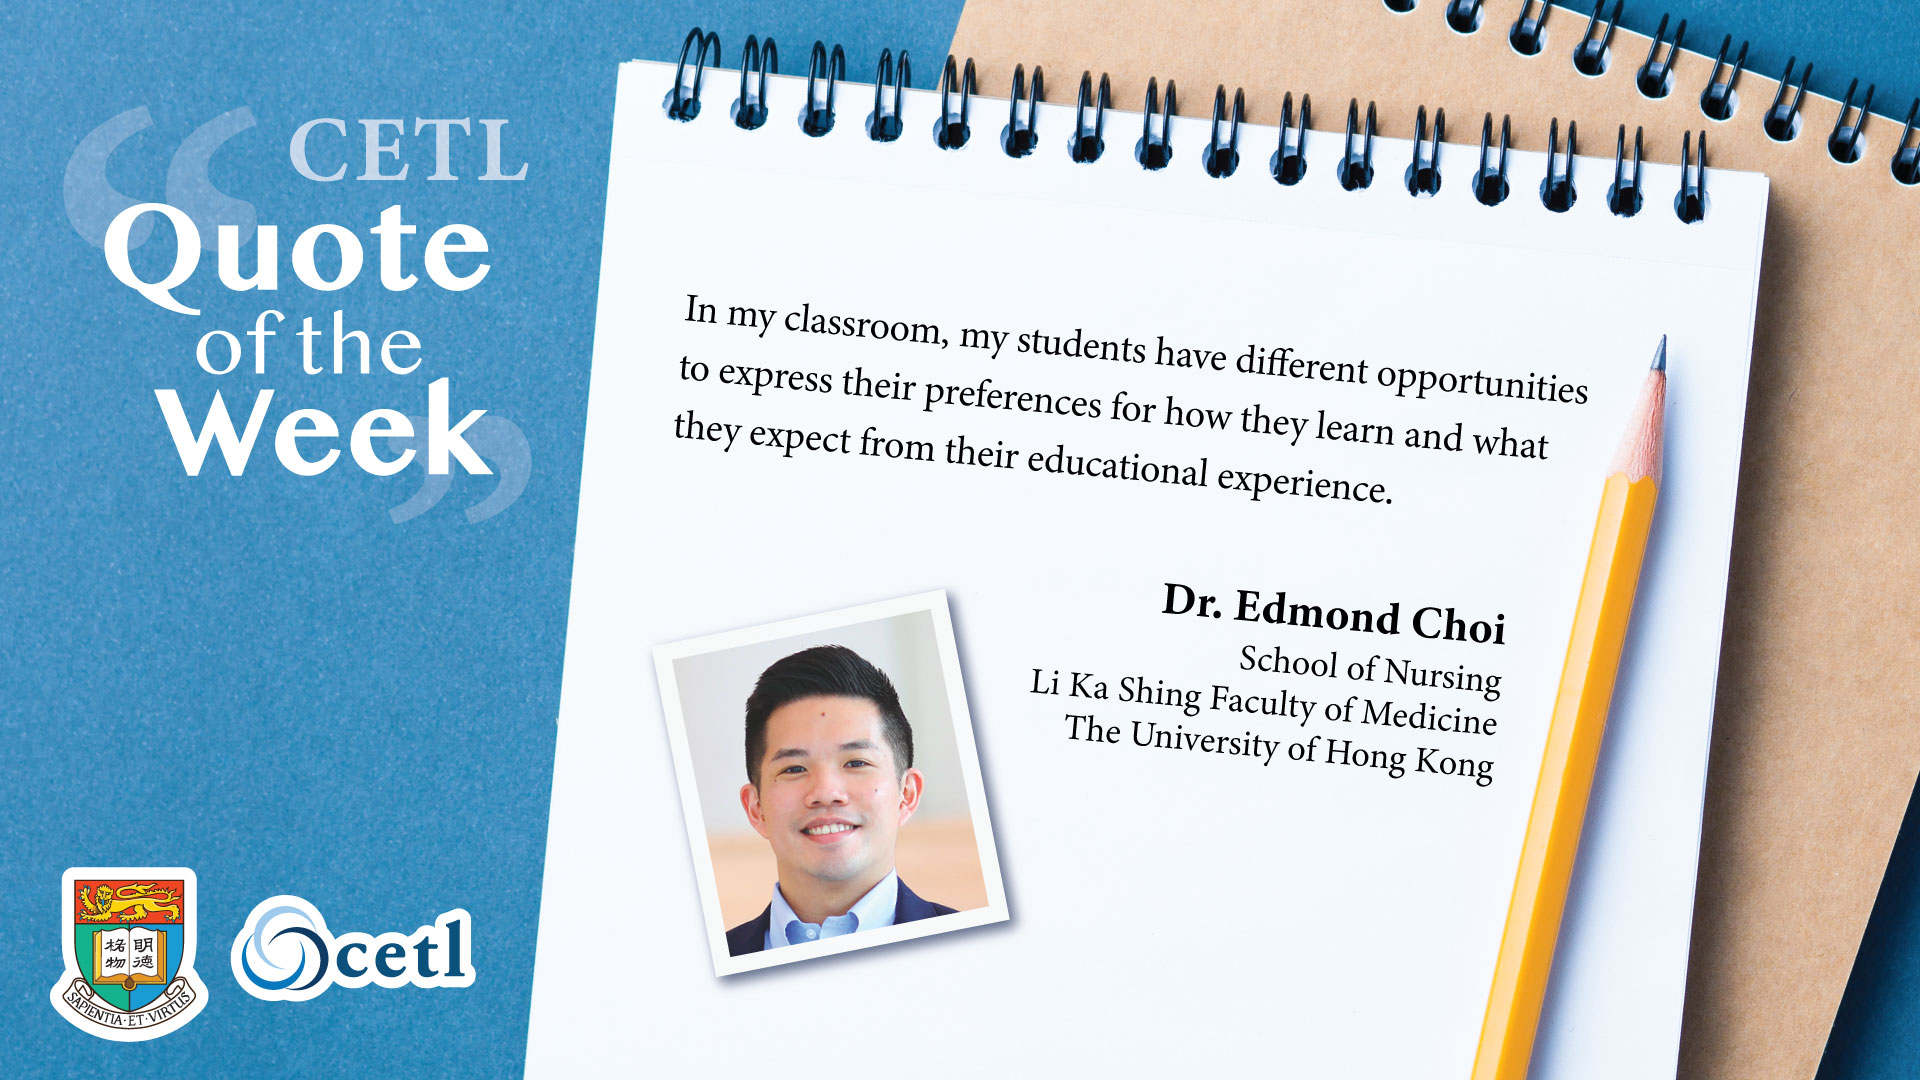 Dr. Edmond Choi - In my classroom, my students have different opportunities to express their preferences for how they learn and what they expect from their educational experience.